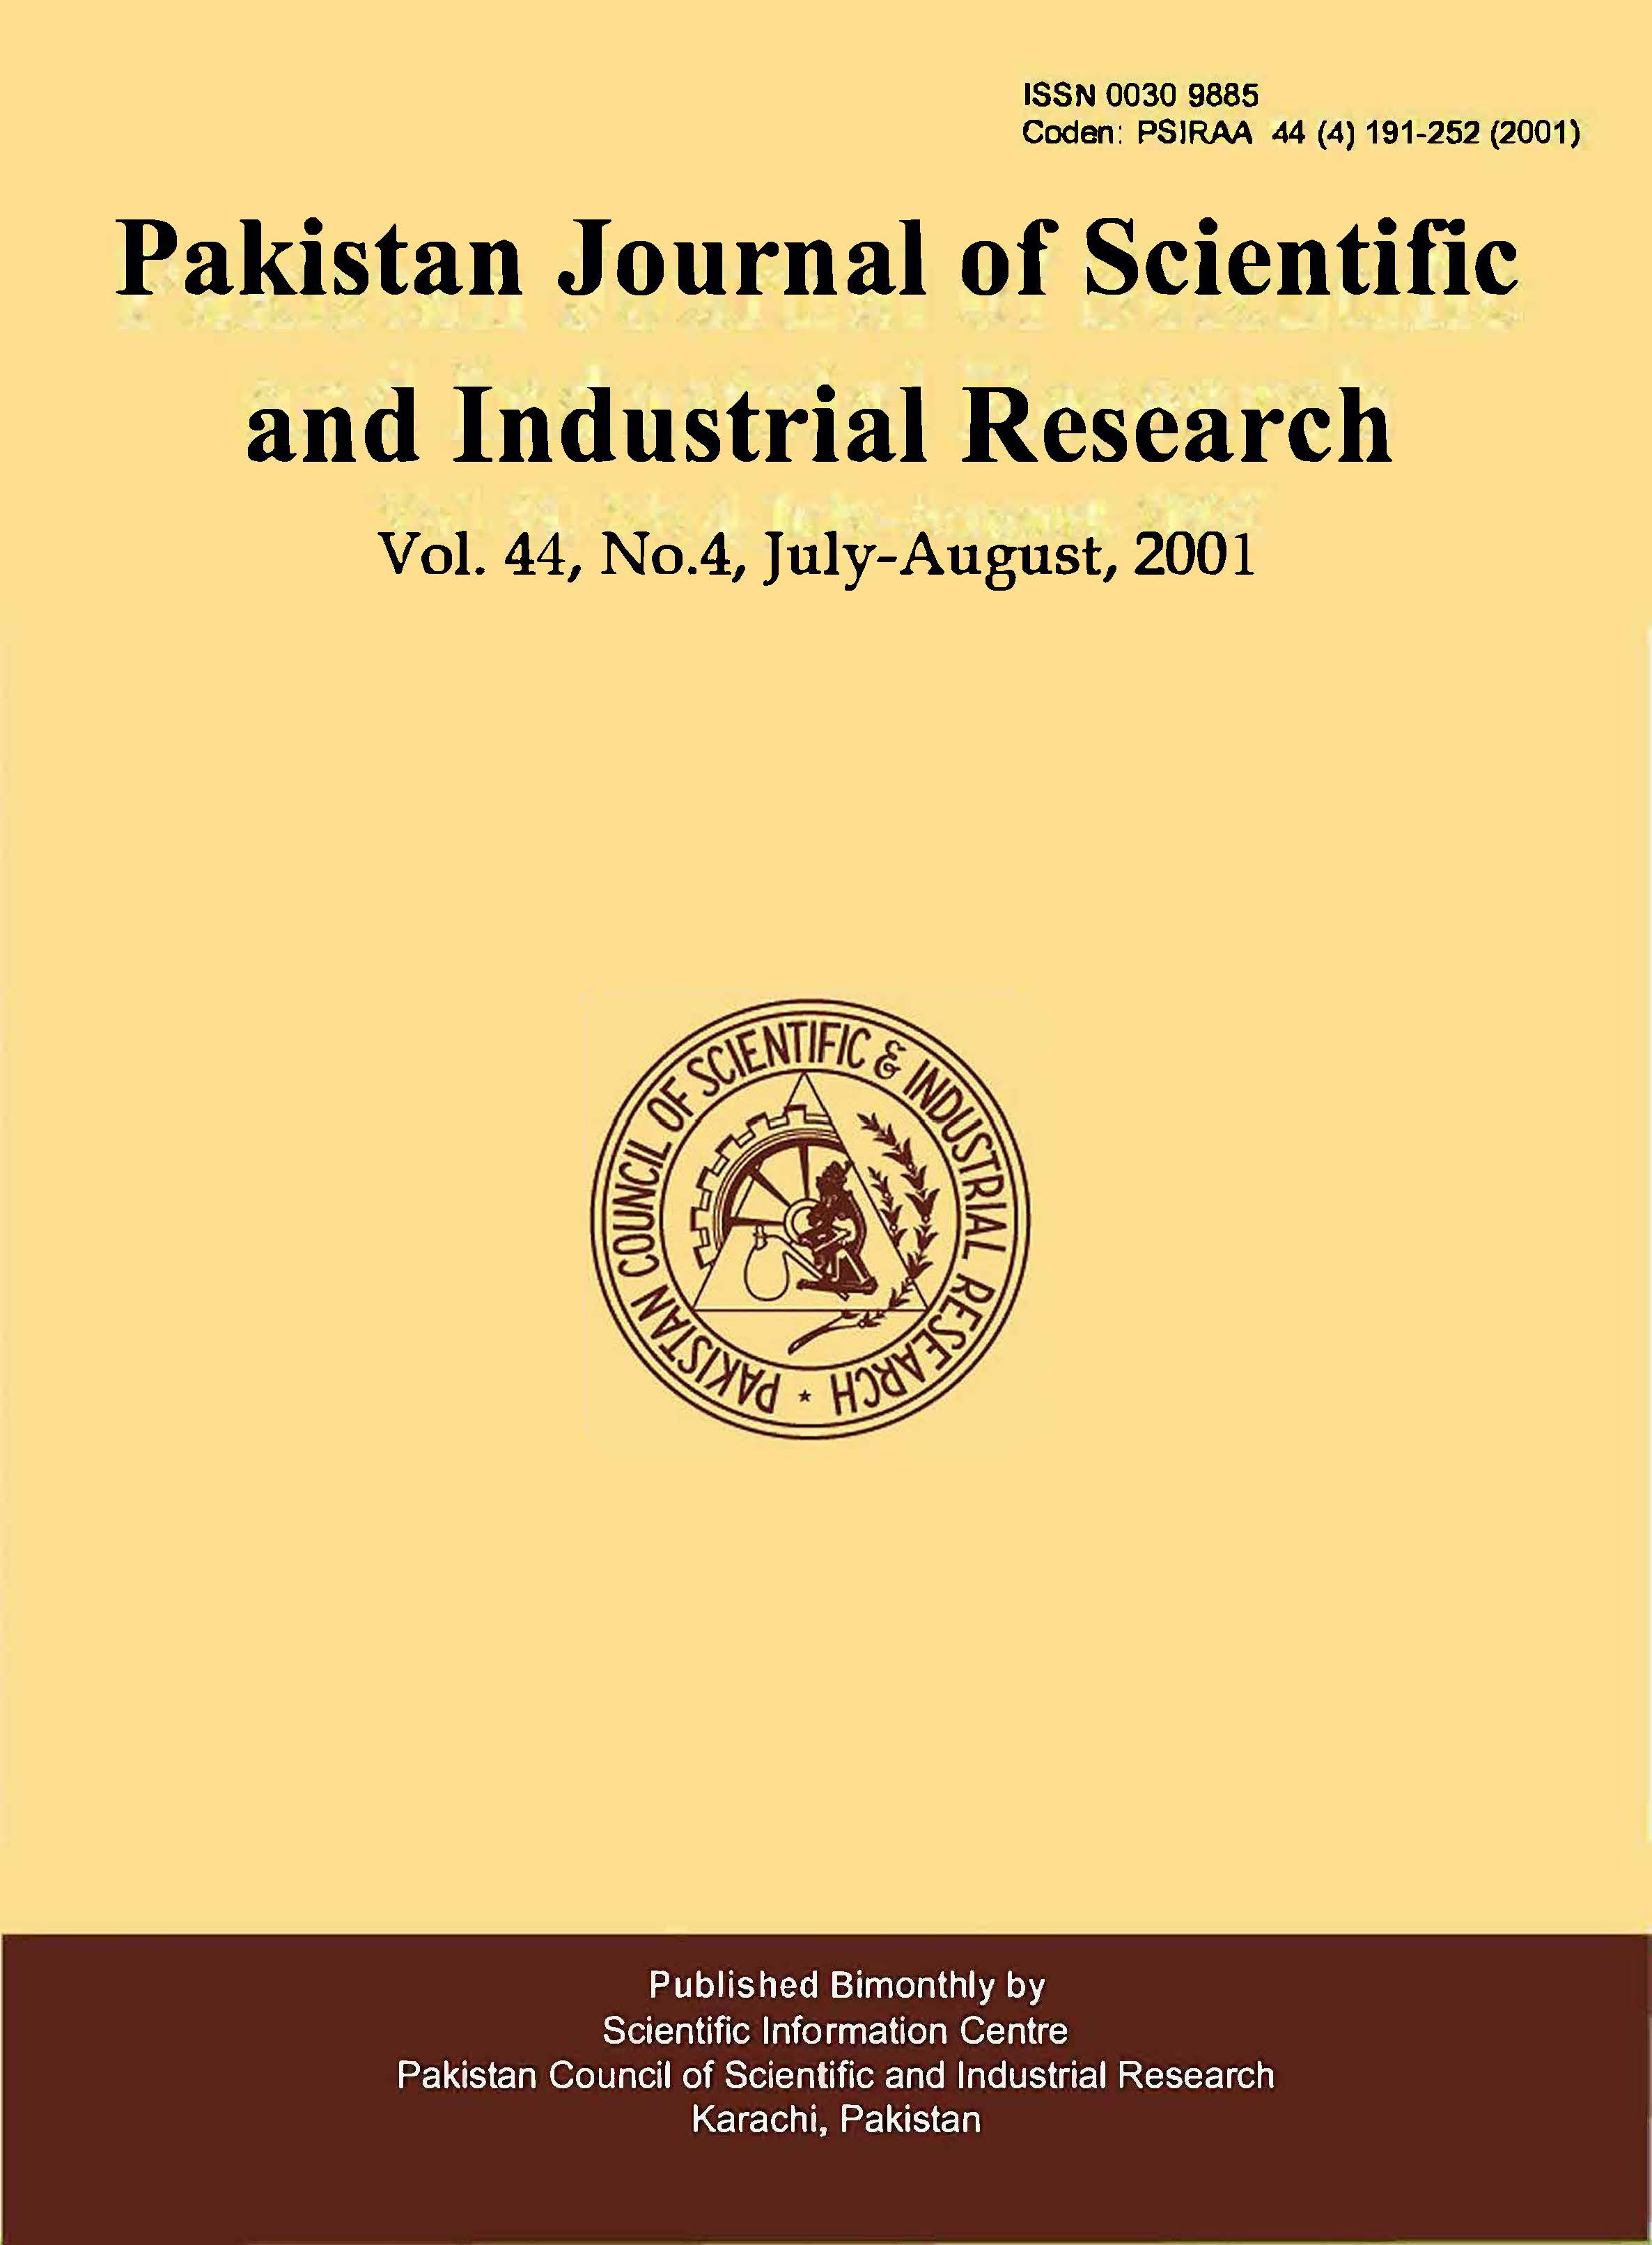 					View Vol. 44 No. 4 (2001): Pakistan Journal of Scientific and Industrial Research
				